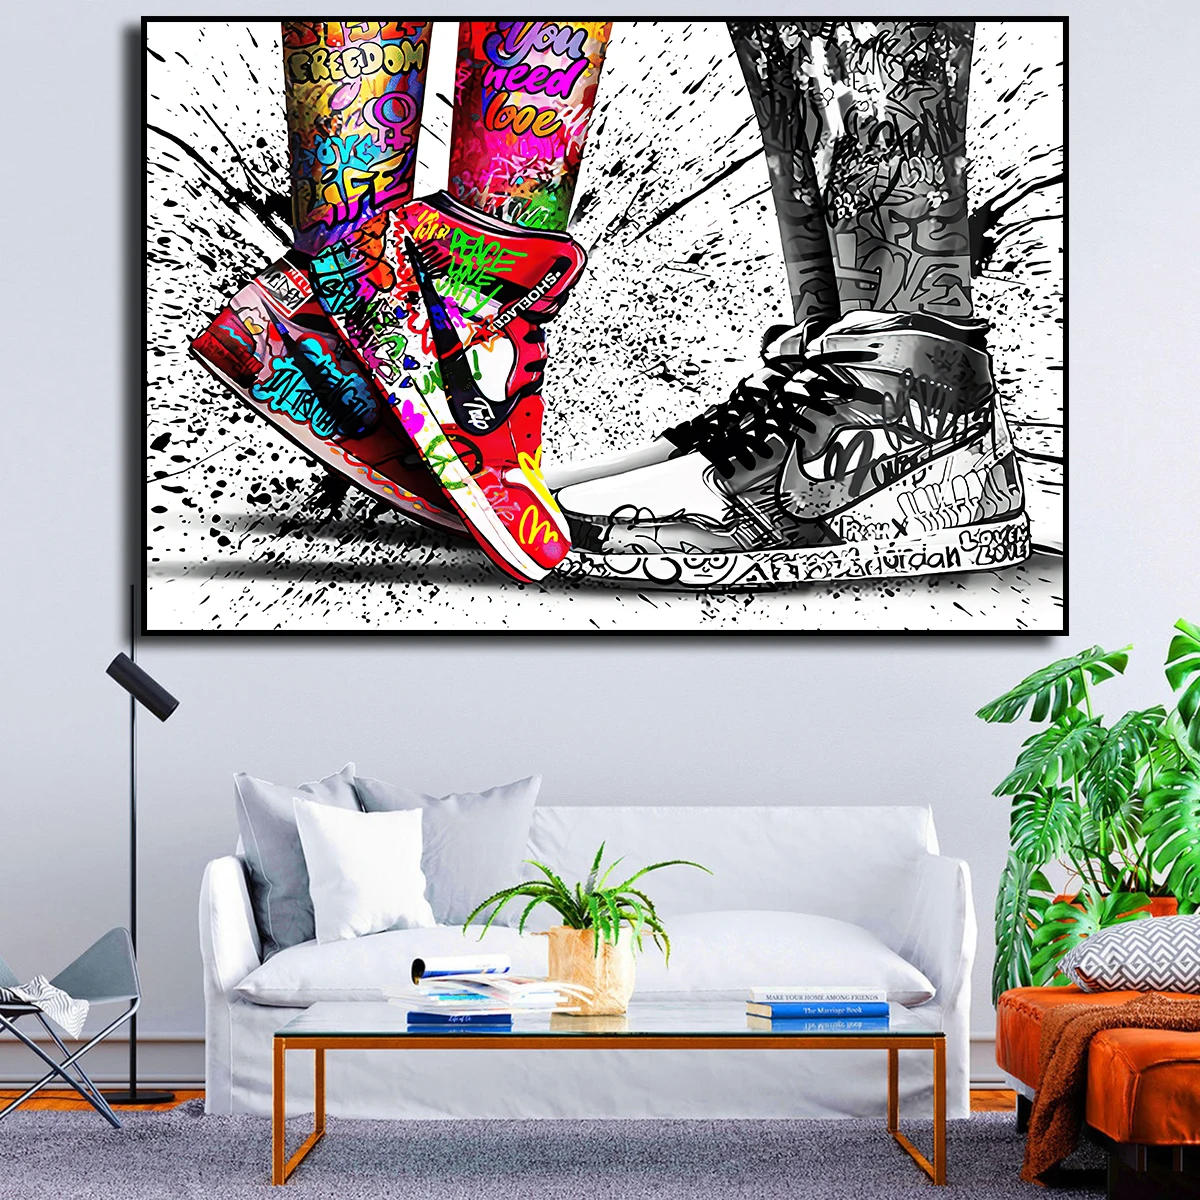 Graffiti Air Jordan Print Canvas Painting Decor Picture For Office Nike Shoes  Air Jordan Canvas Poster Living Room Home Decor - Buy Canvas Painting Wall  Art,Alec Monopolys Dom Perignon Masked Chil,Posters And